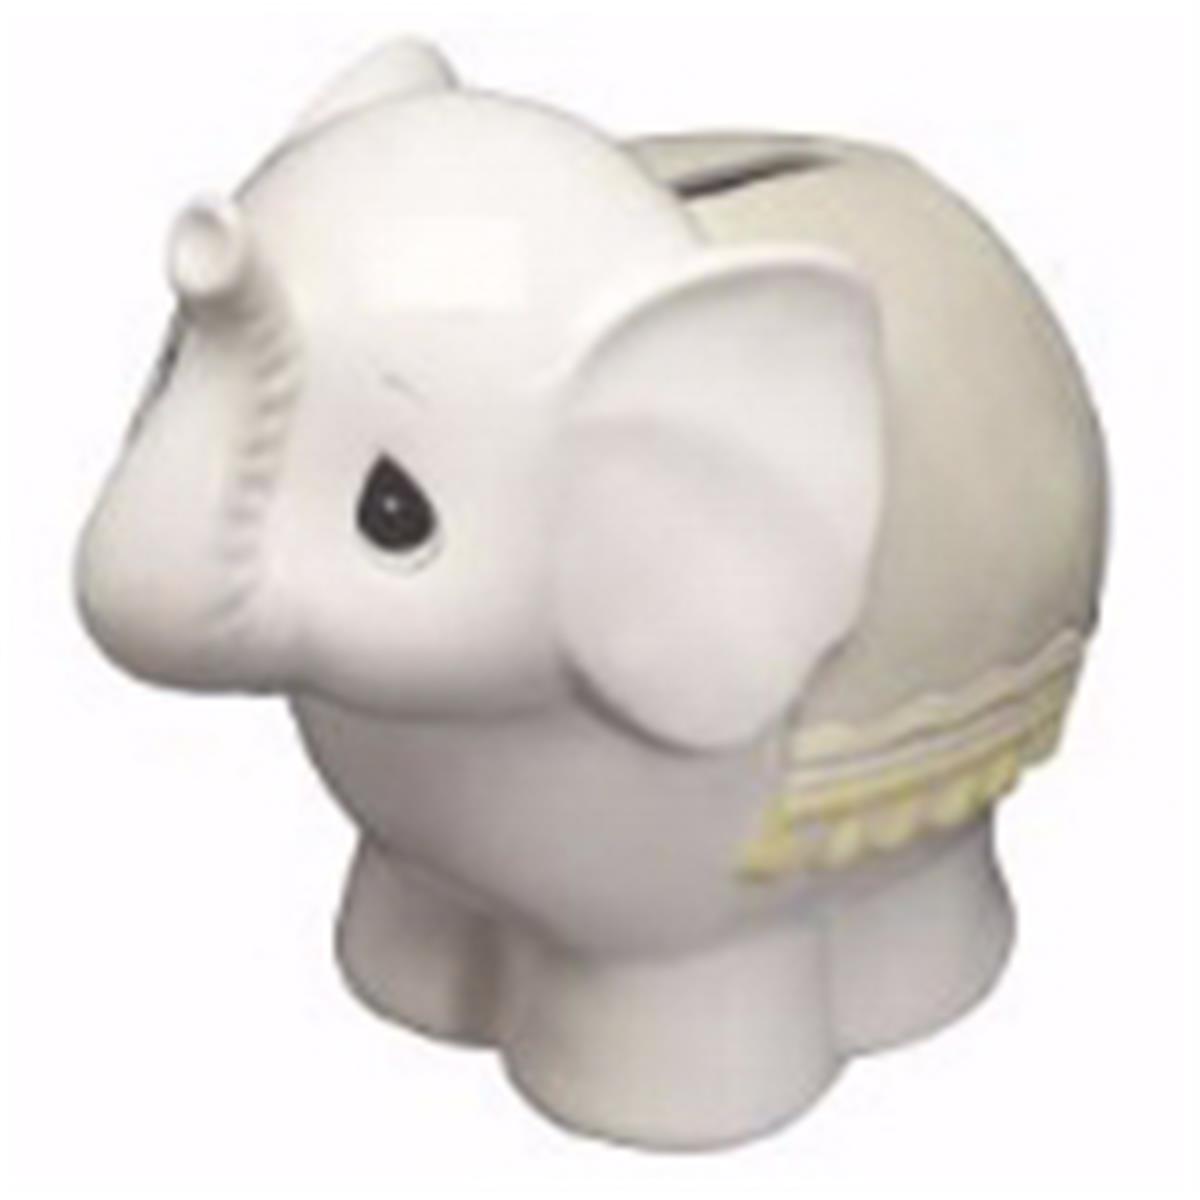 Picture of Precious Moments 164089 5.5 in. Bank-Tuk Elephant